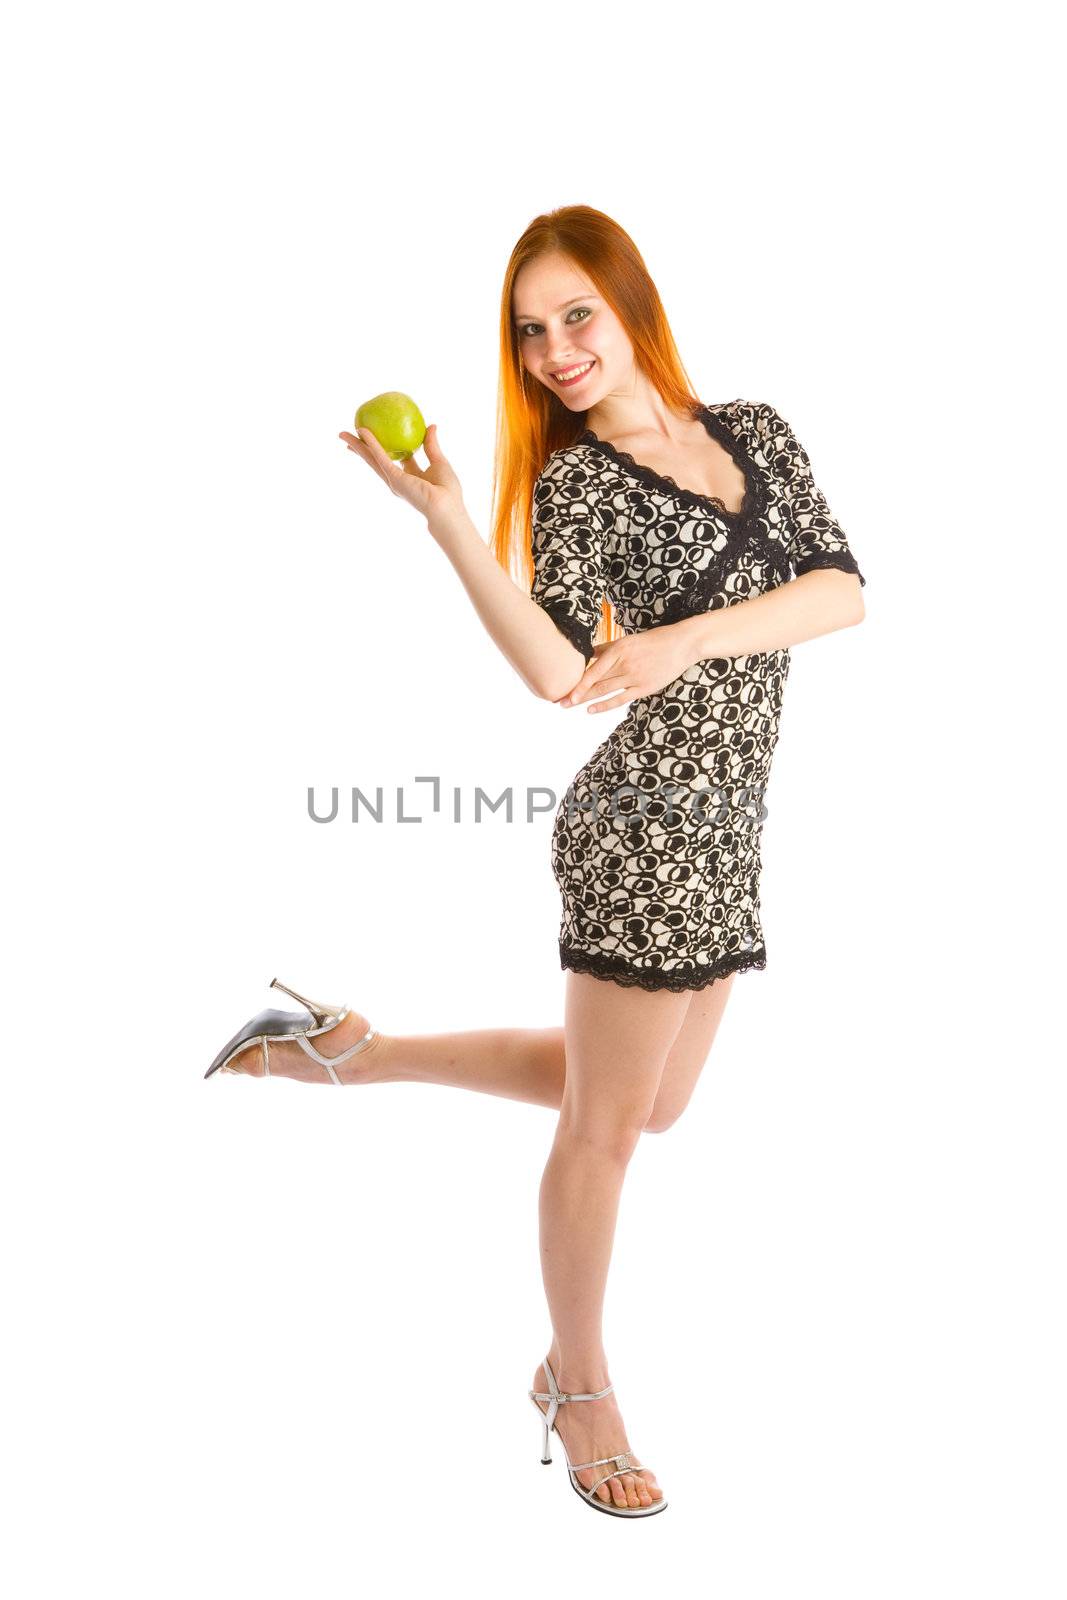 dancing with apple by vsurkov